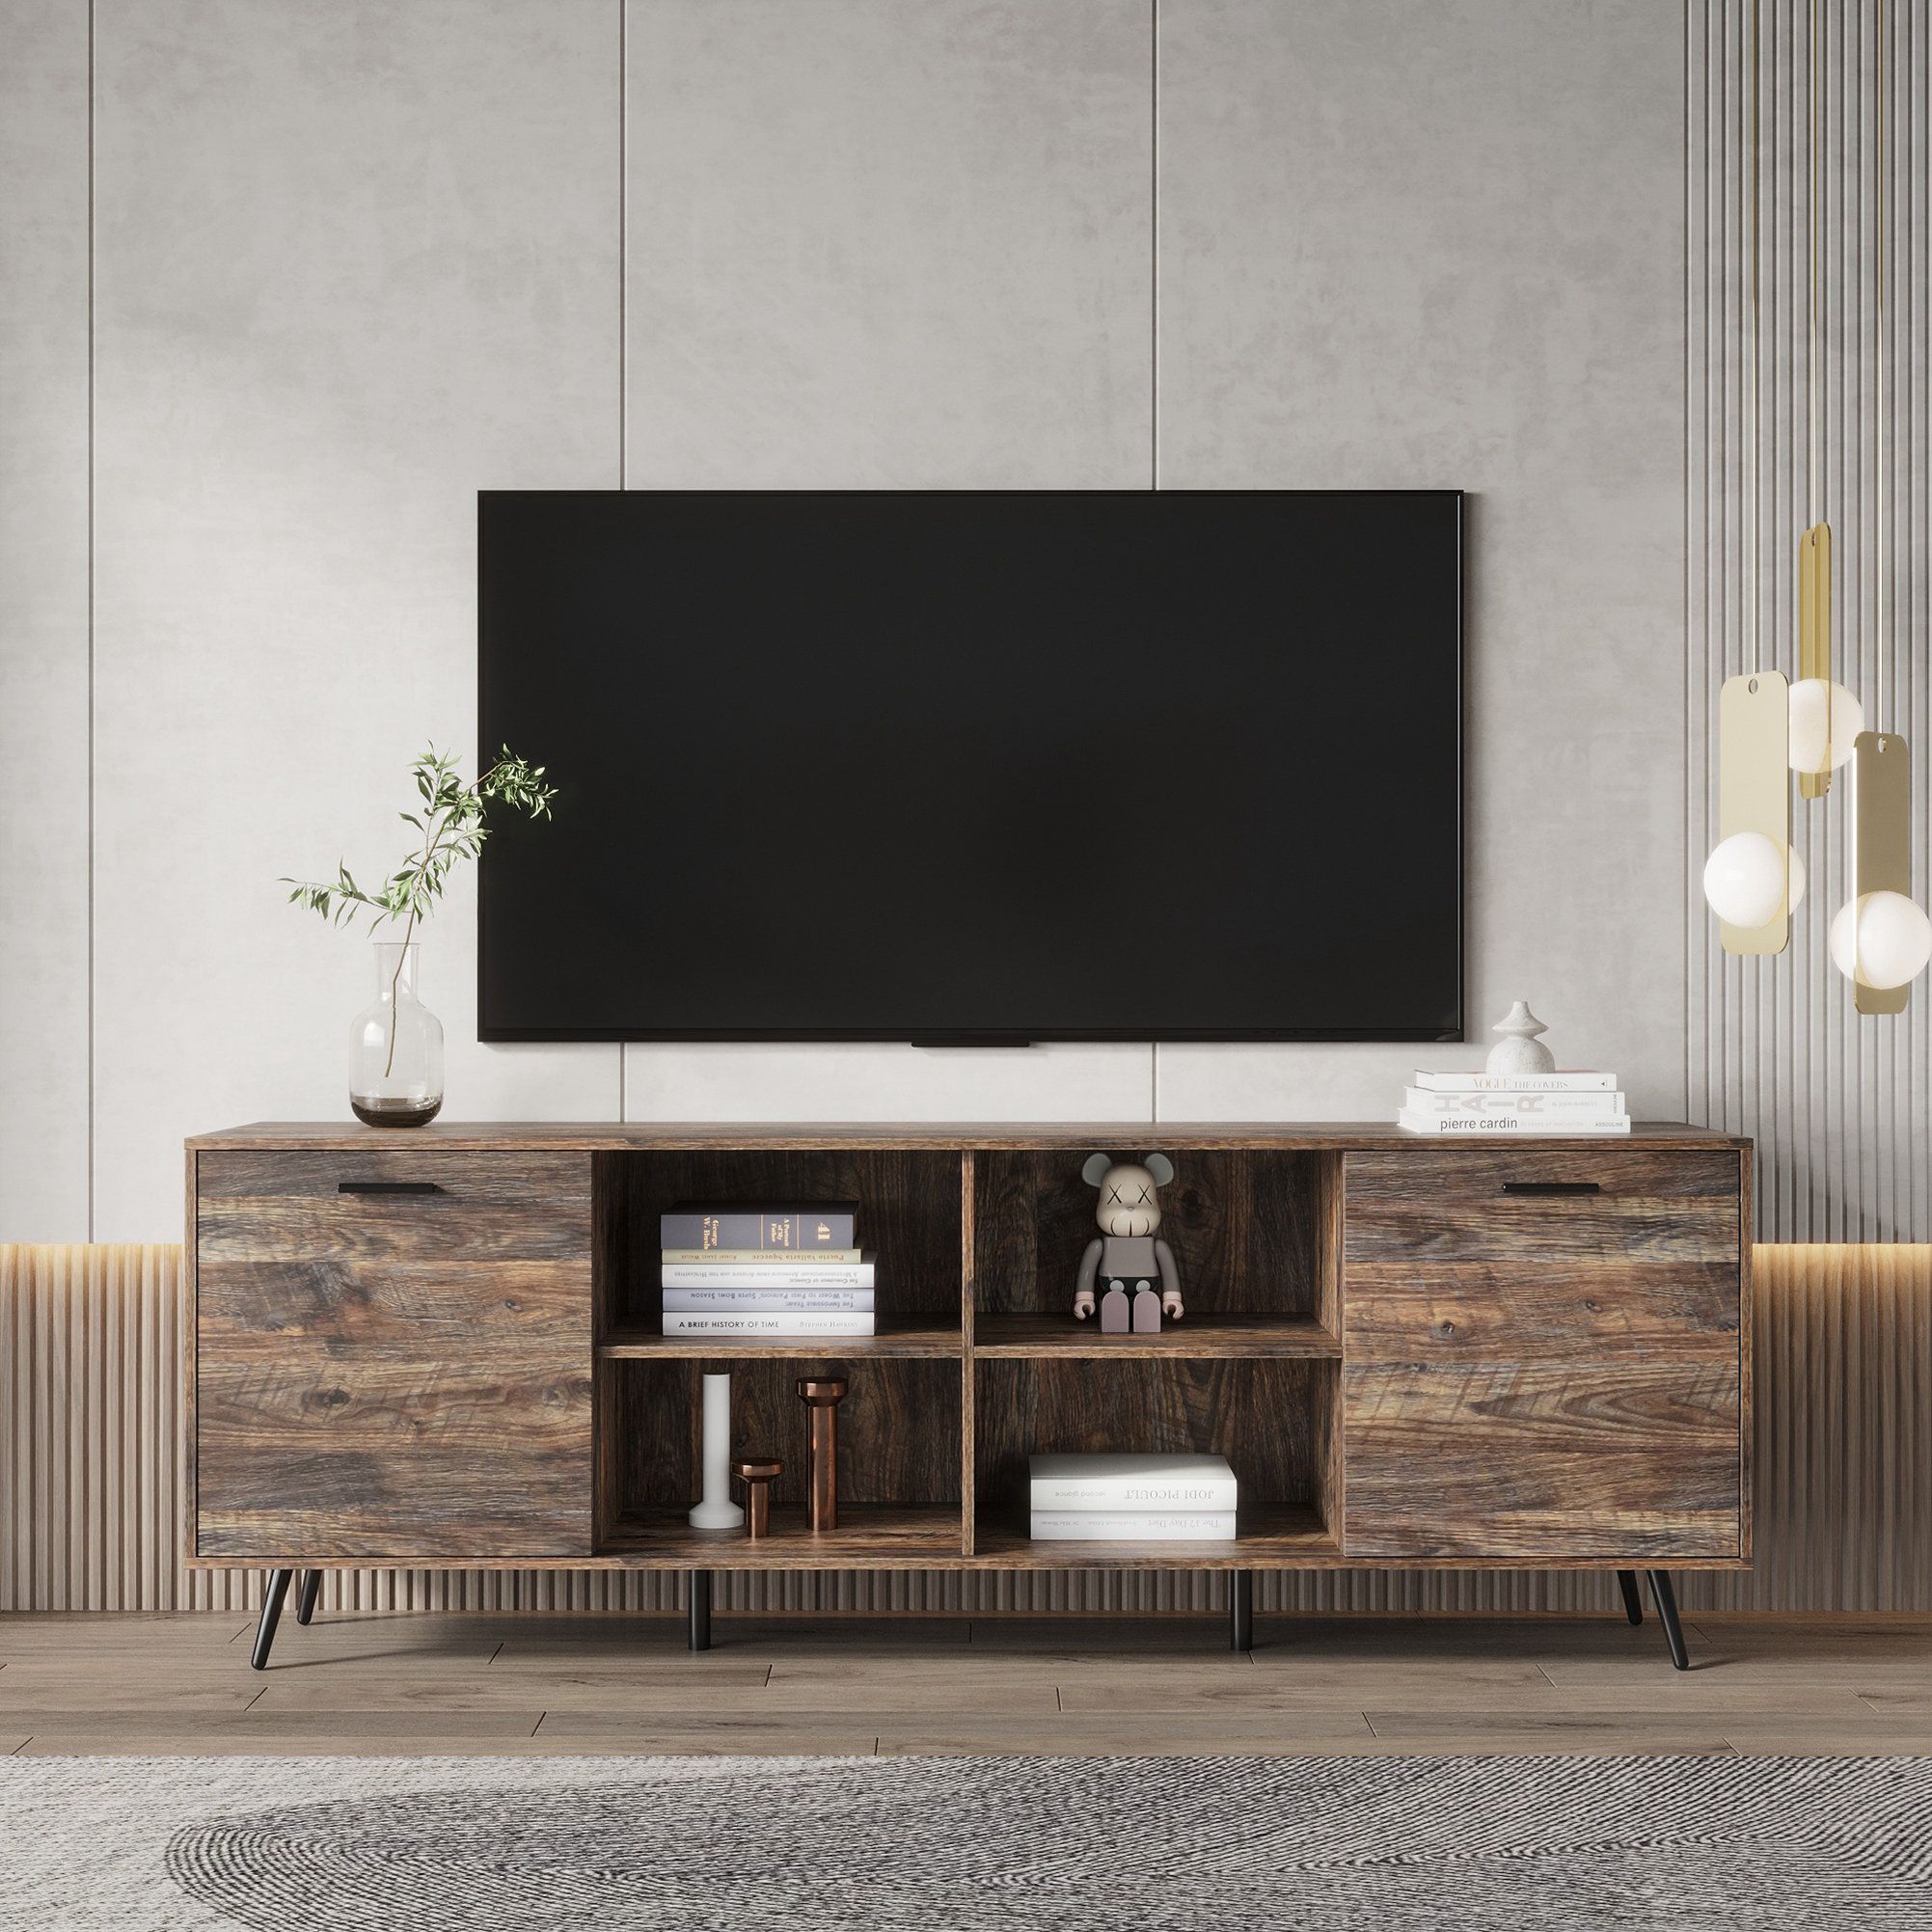 George Oliver Jiberrl Modern Entertainment Center Adjustable Storage Cabinet  Tv Console For Living Room | Wayfair With Regard To Entertainment Center With Storage Cabinet (View 3 of 15)